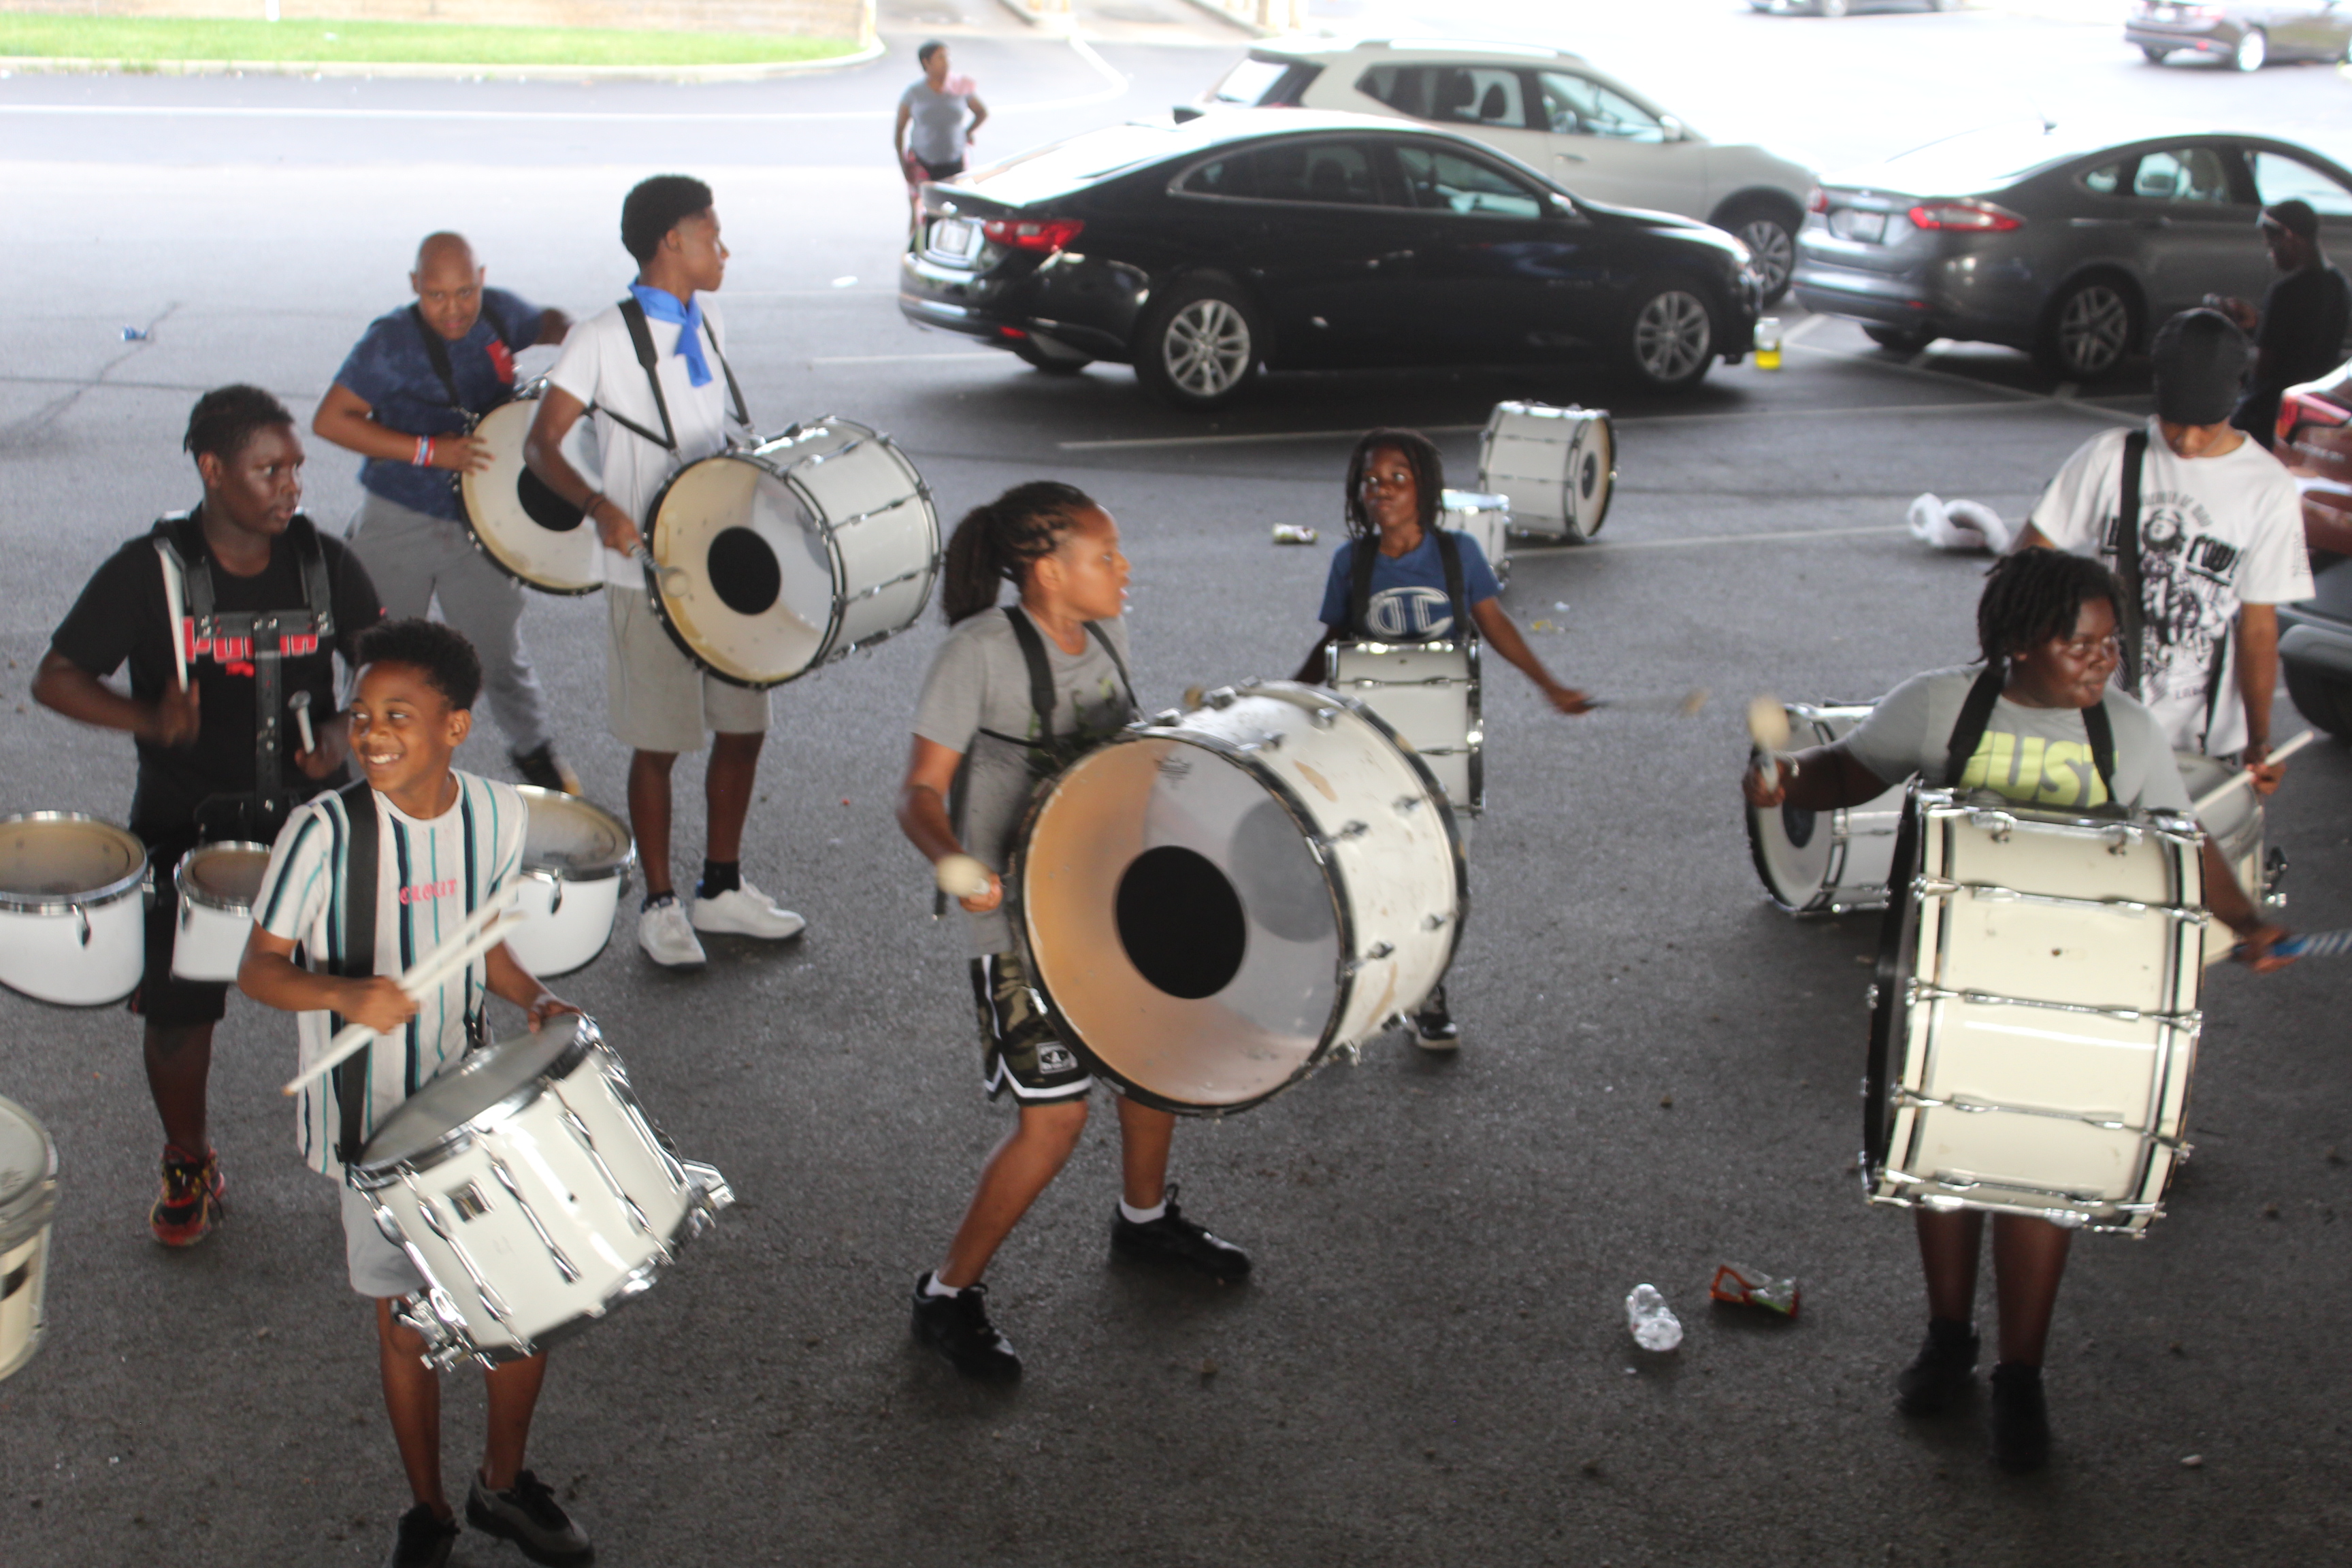 Members of the Western Stars Drill Team & Drum Line practice in a parking lot in downtown Dayton.  CORNELIUS FROLIK / STAFF